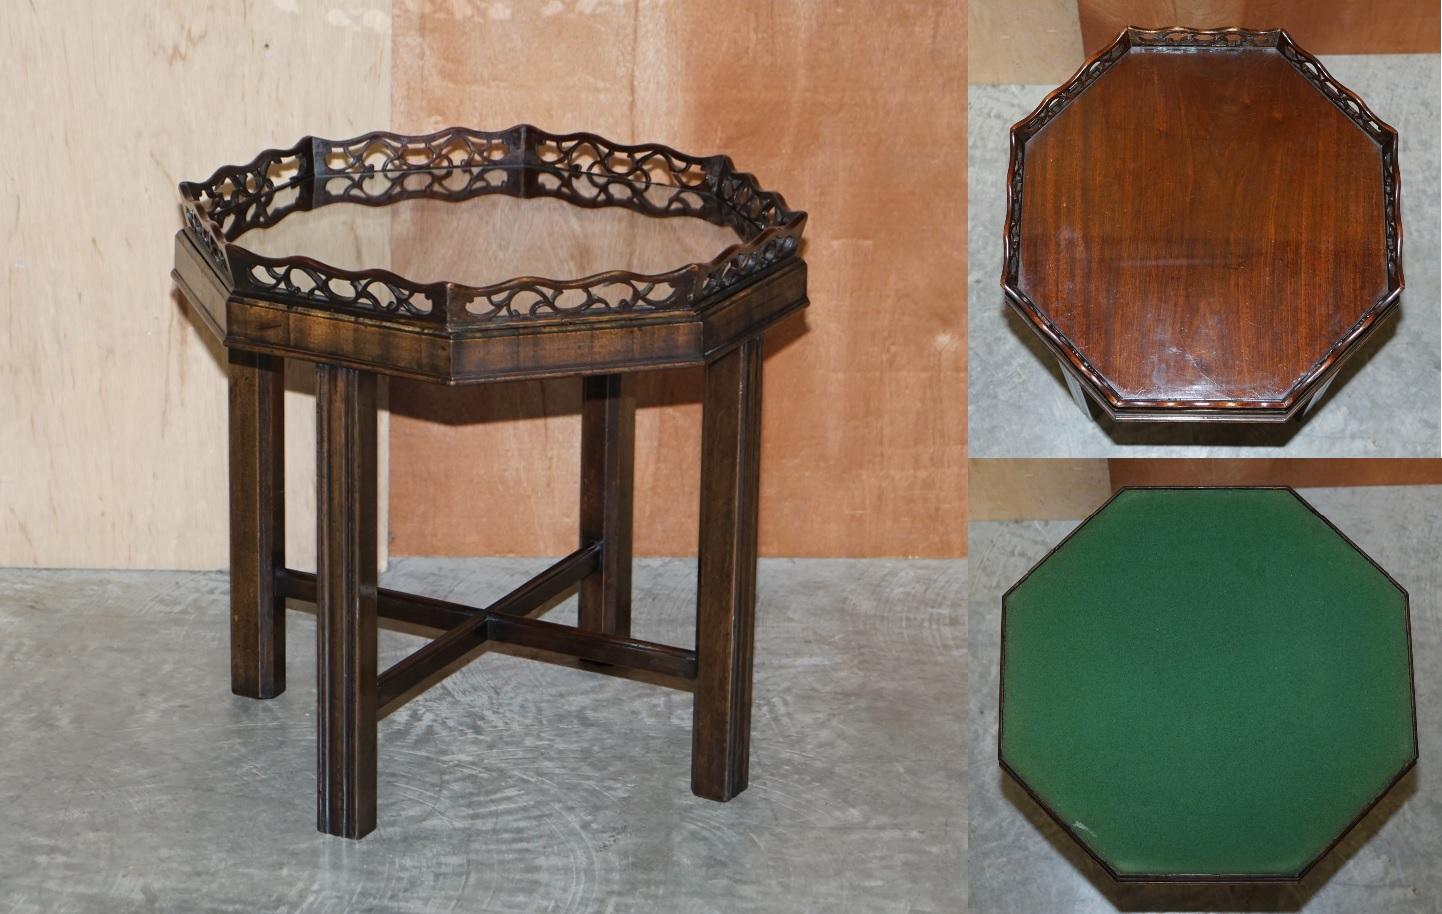 We are delighted to offer this lovely very rare Thomas Chippendale style Fret work carved occasional table with removable tray top revealing a baize lined card or games table 

A good looking and well made piece, it is of course made after Thomas